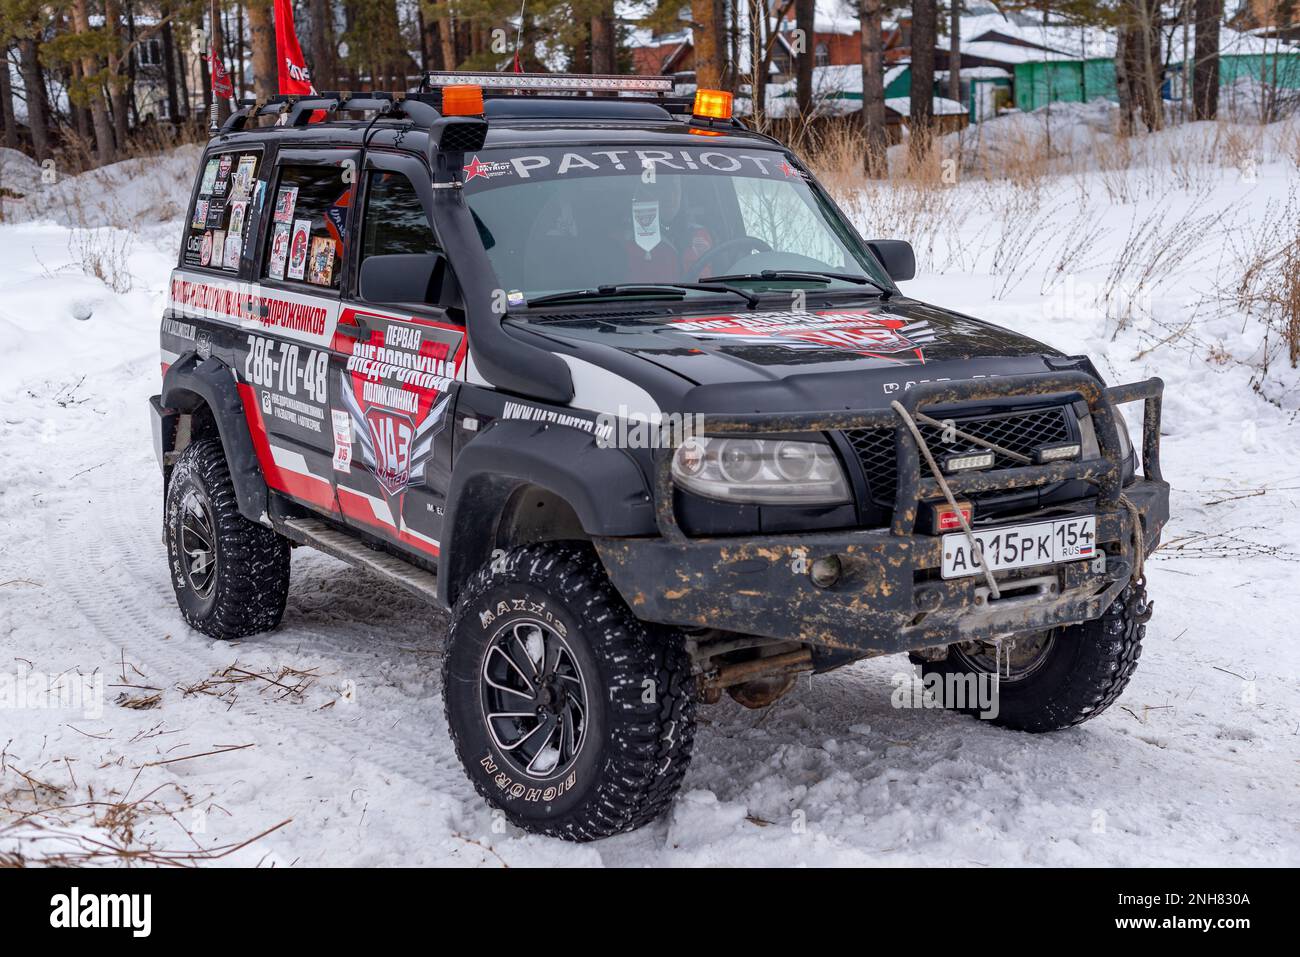 Prepared for off- road evacuation, the Russian 4x4 UAZ Patriot SUV with a protective bumper stands in the snow in winter. Stock Photo